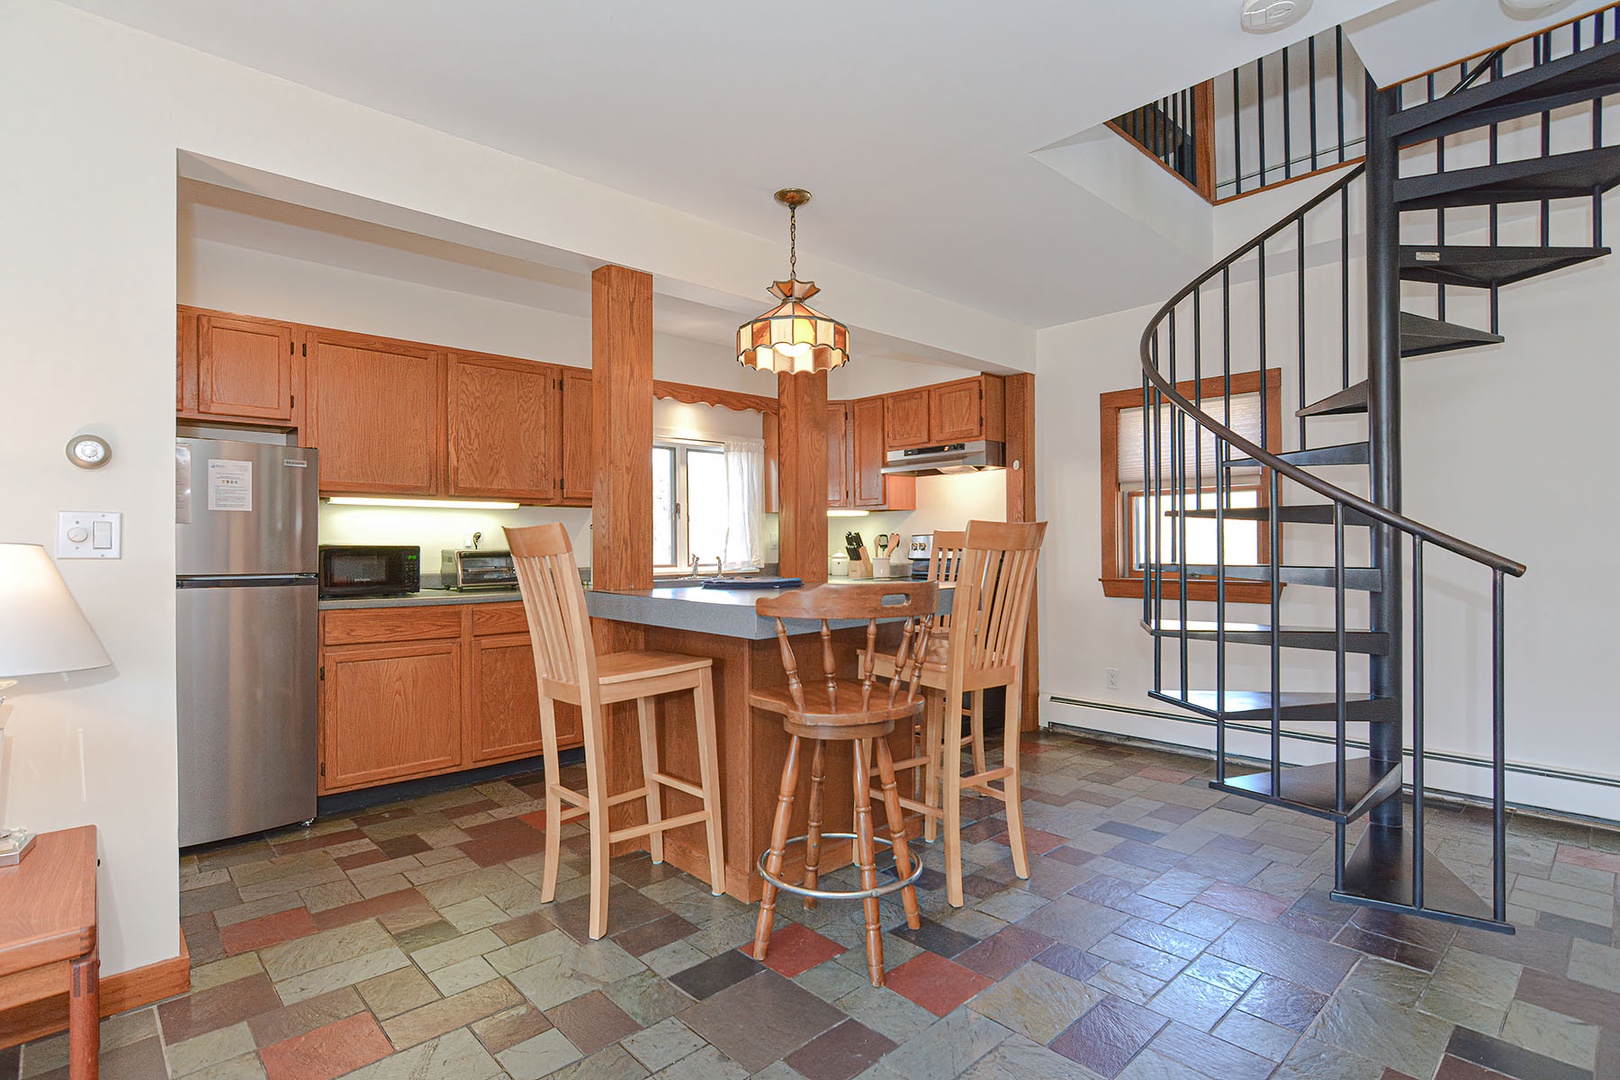 Kitchen and dining area. Spiral stairs lead to the second floor Primary suite.